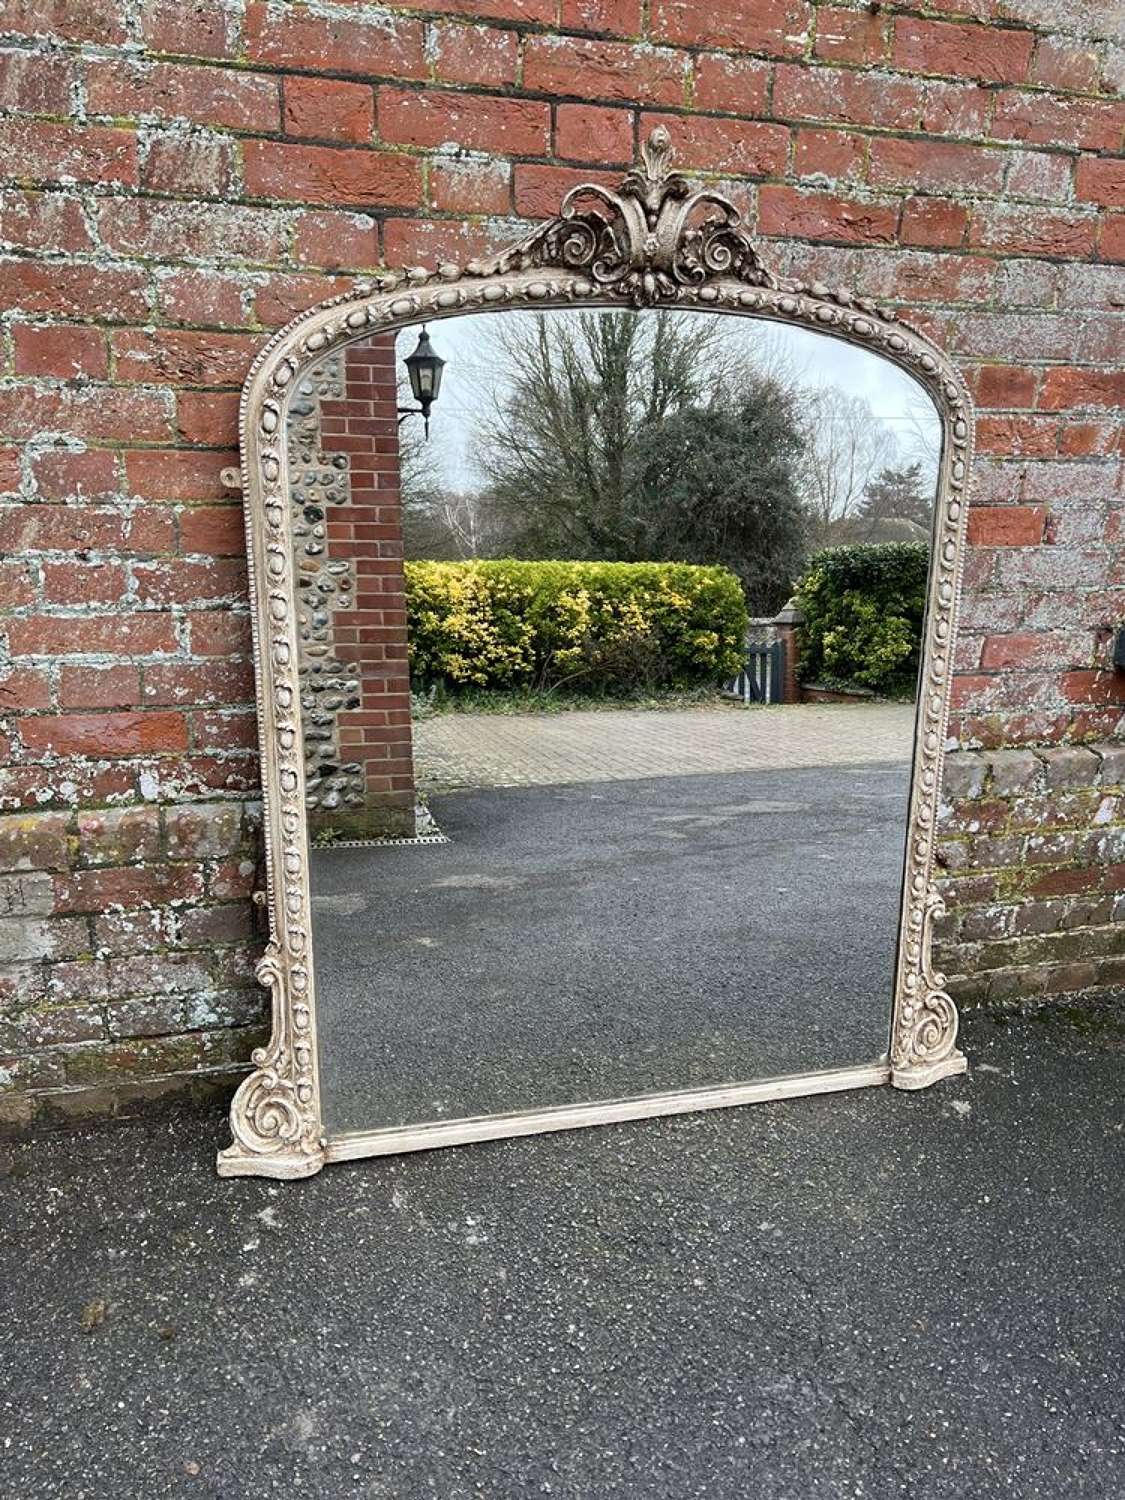 A Stunning large Antique English 19th C painted Overmantle Mirror.